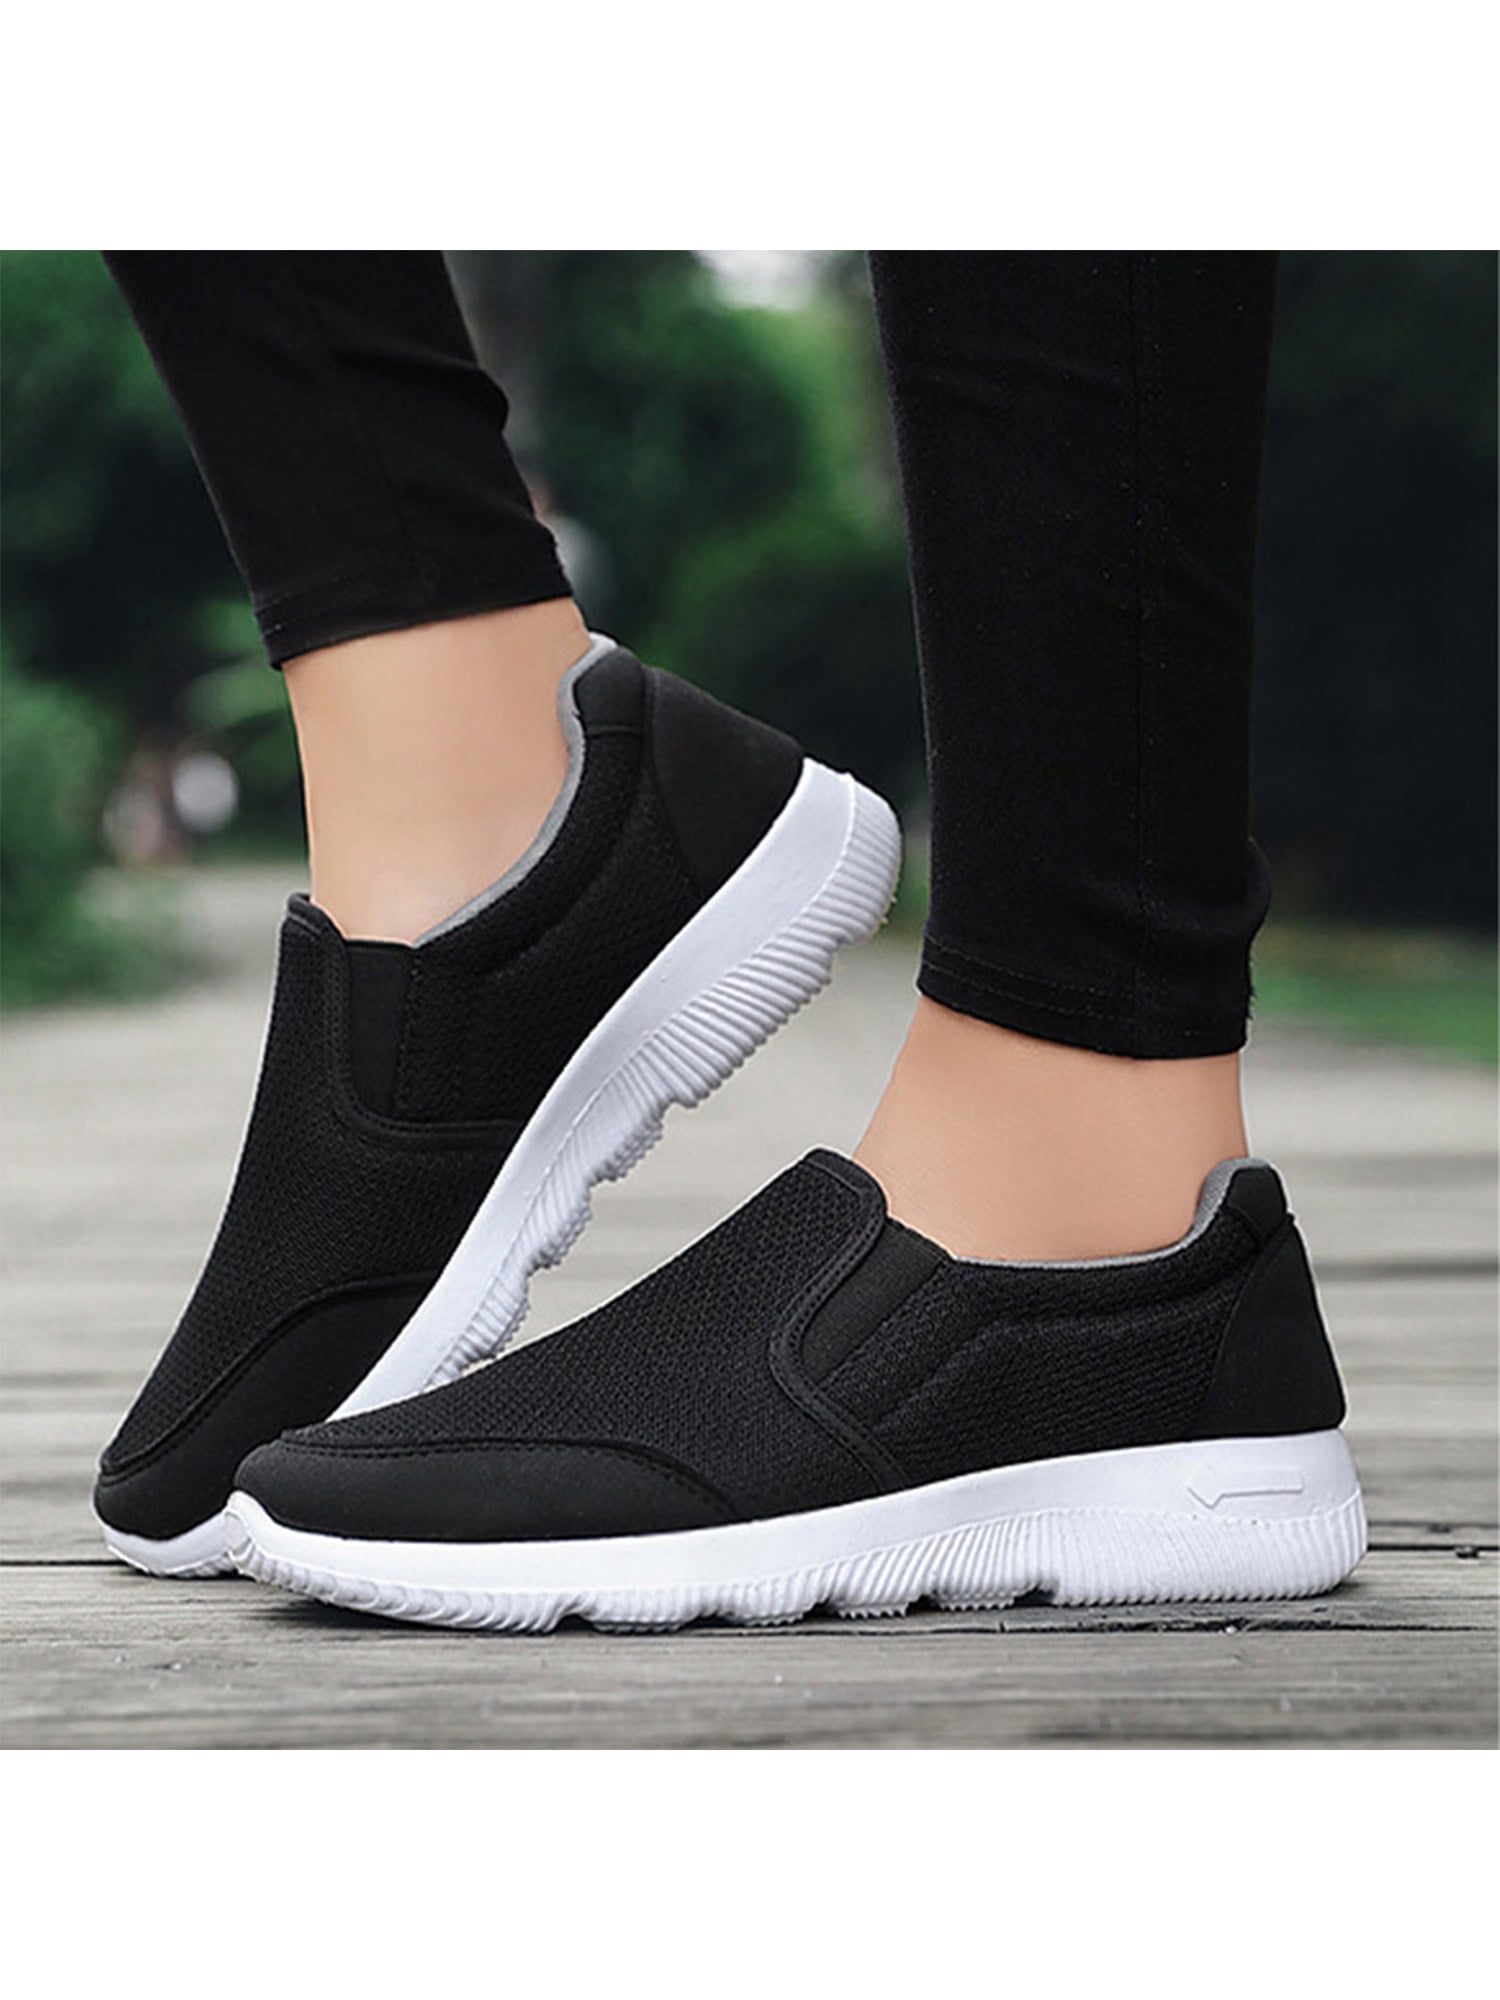 Men Women Mesh Breathable Trainers Round Toe Slip on Casual Shoes Lightweight Road Running Walking Sports Sneakers